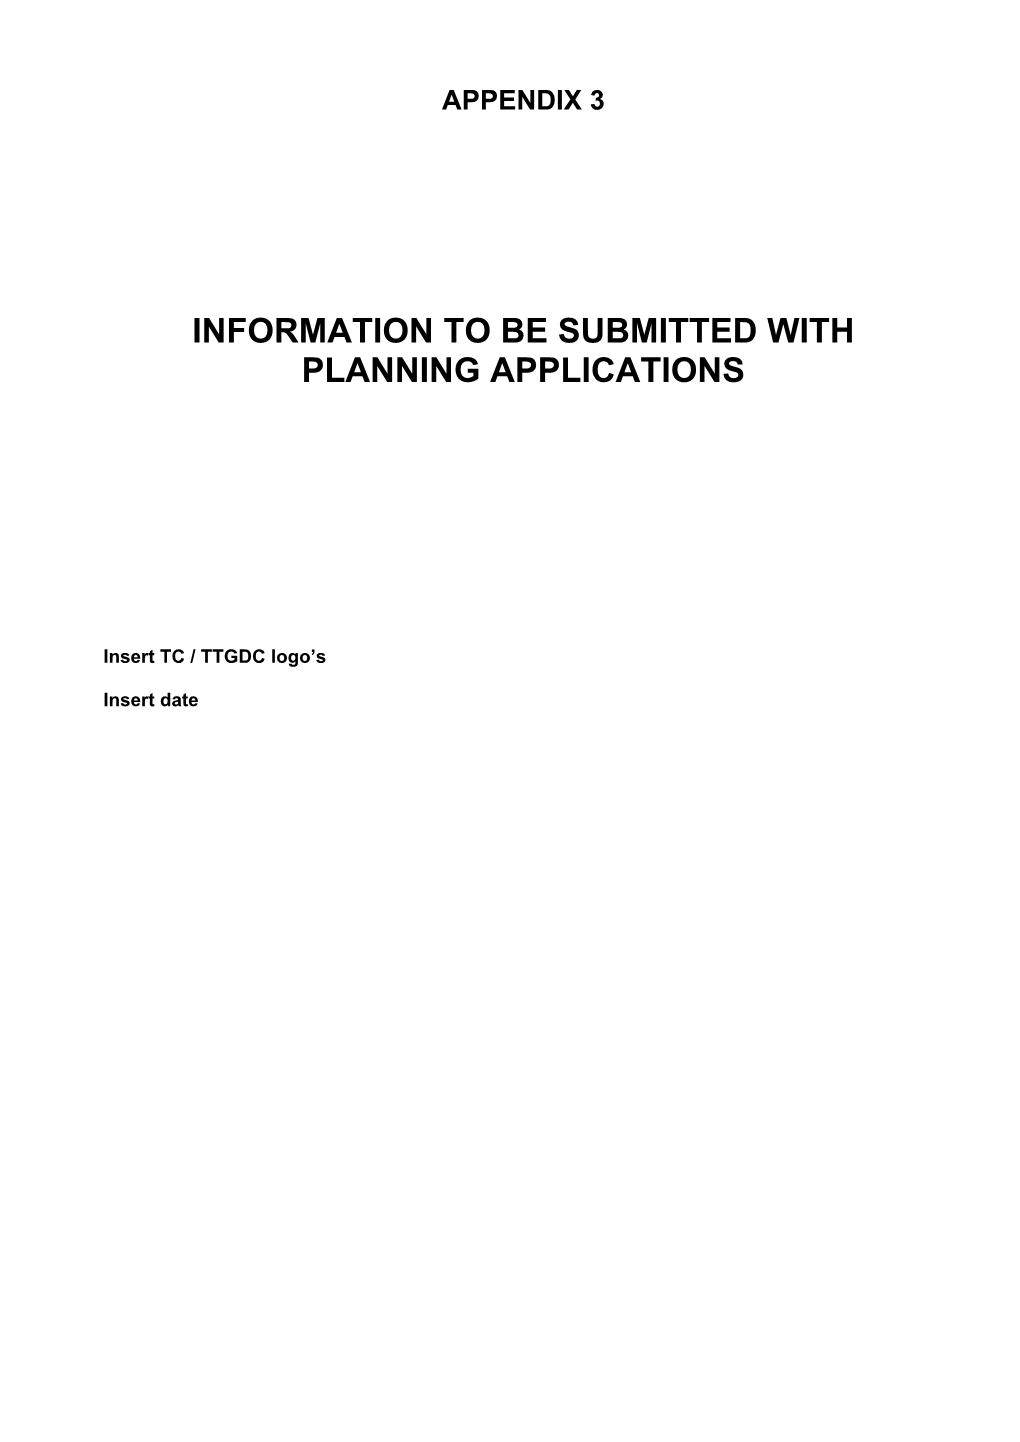 Information to Be Submitted with Planning Applications